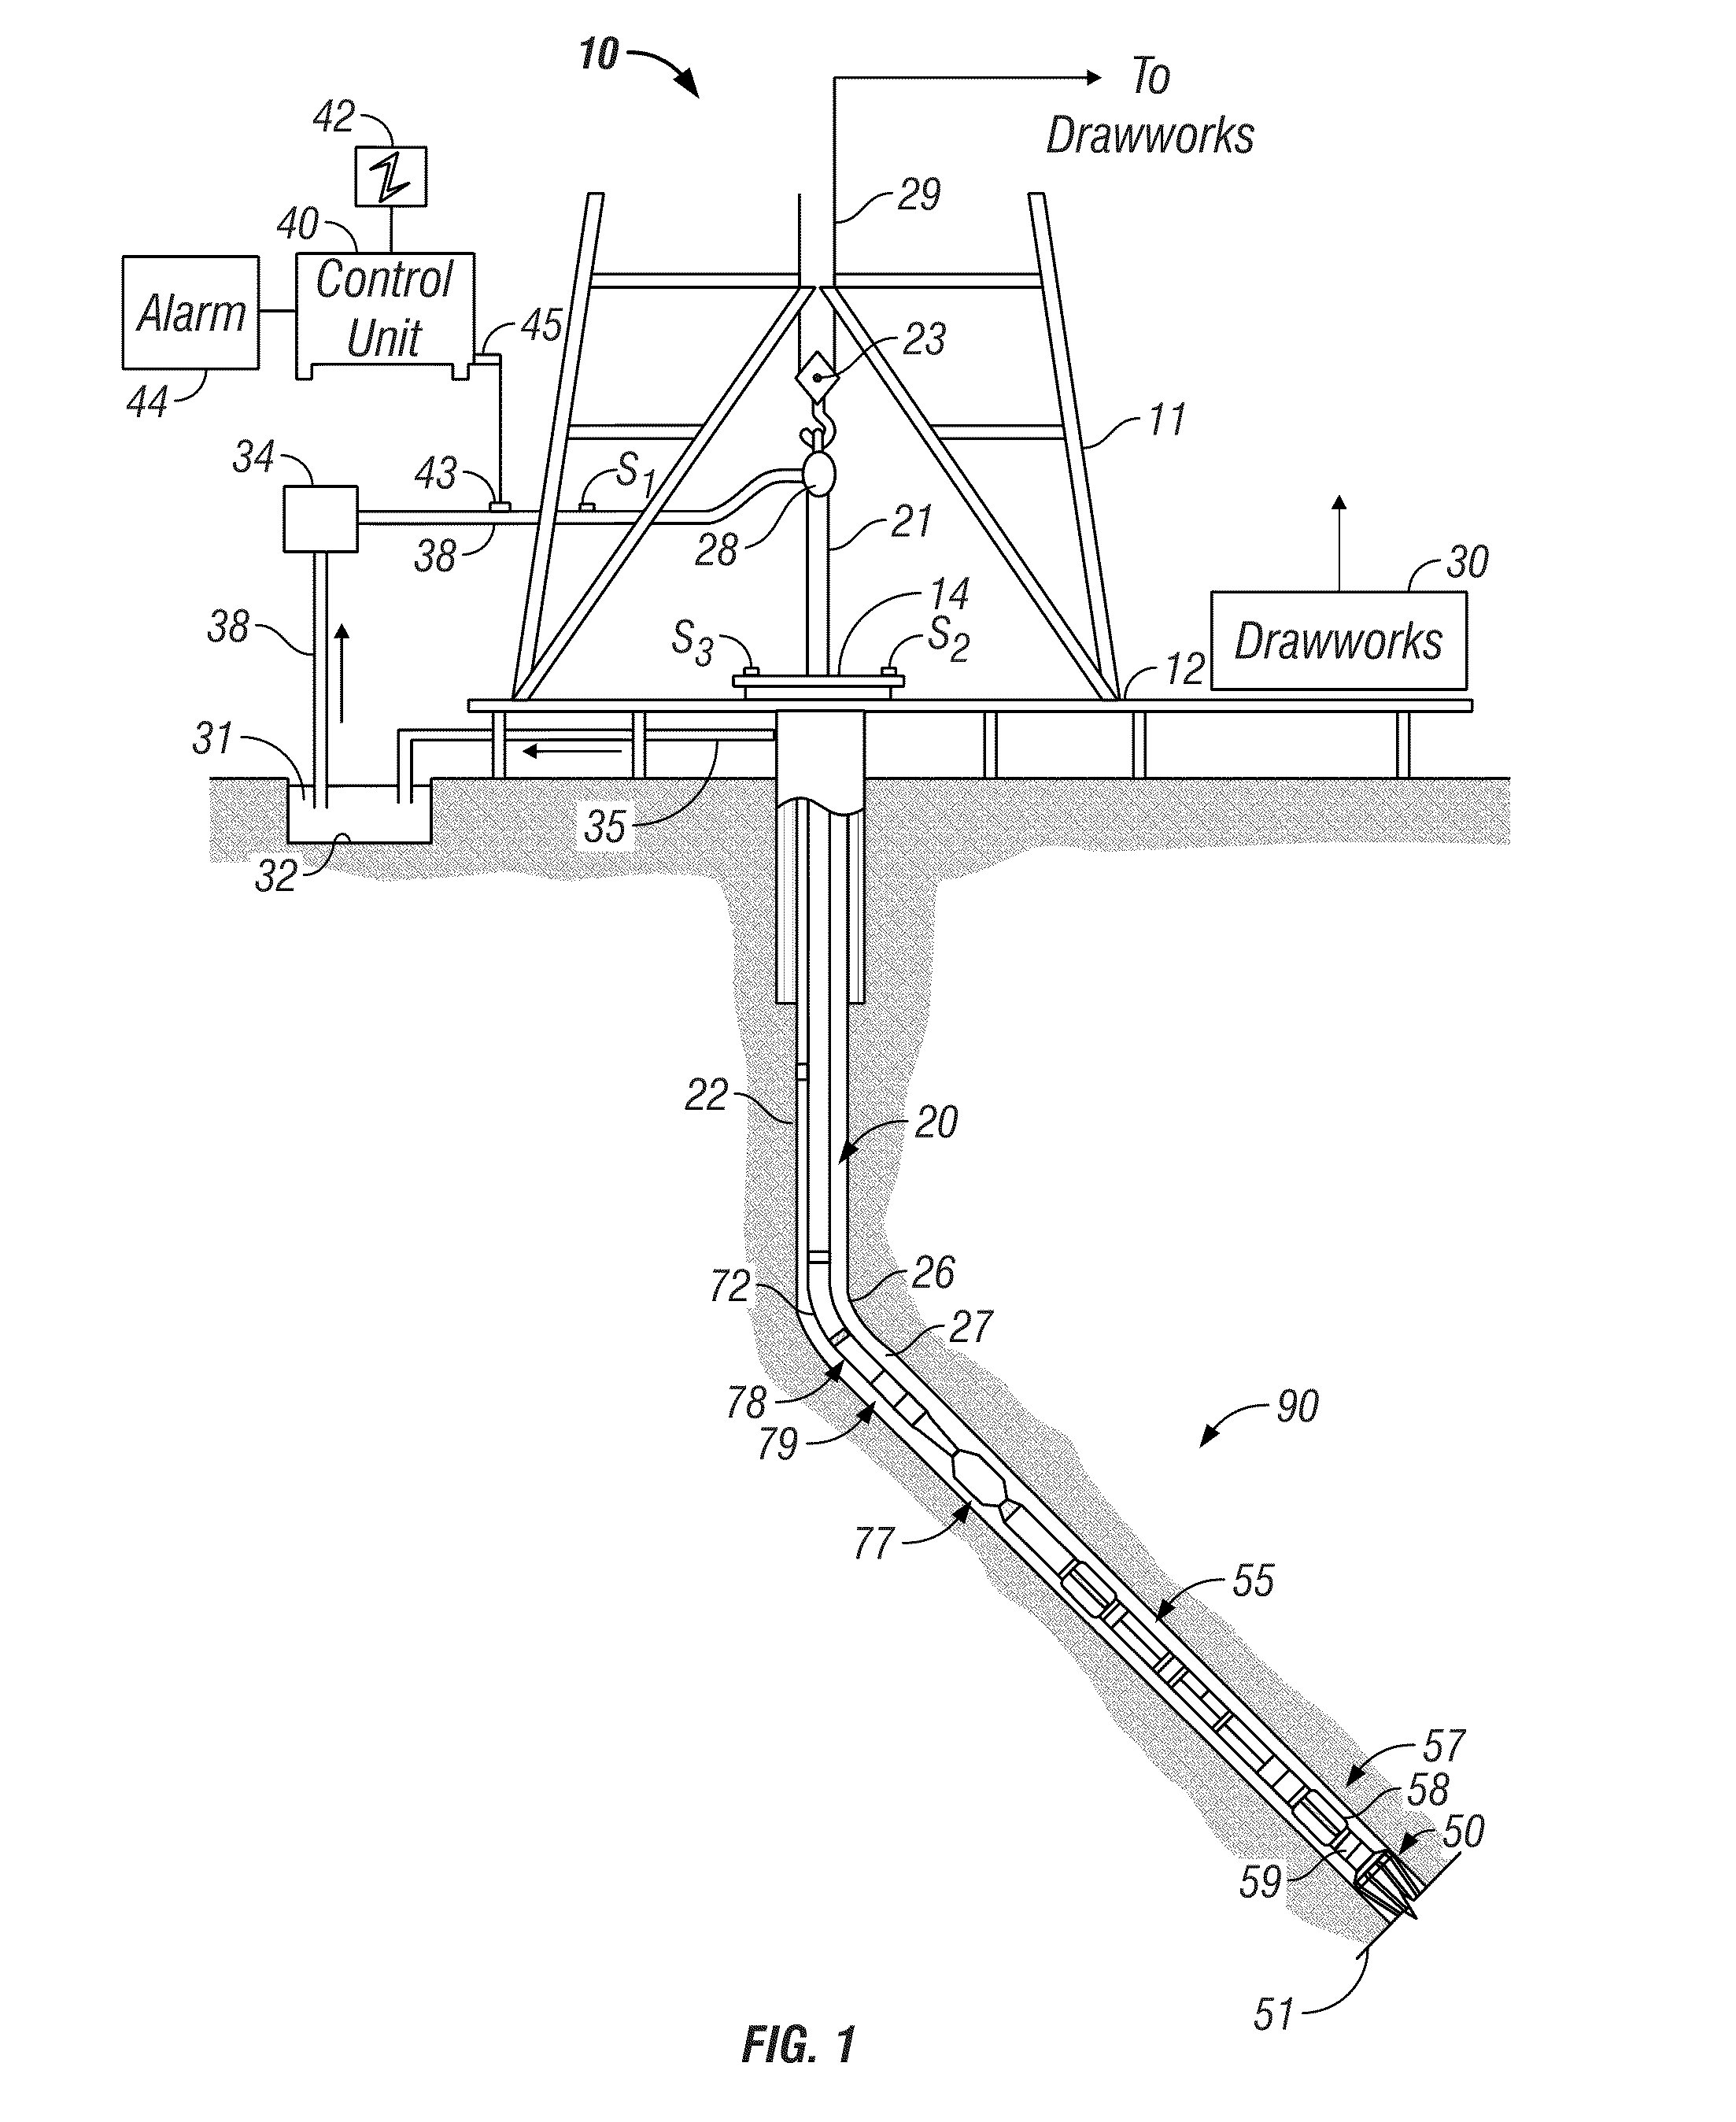 Sending a Seismic Trace to Surface After a Vertical Seismic Profiling While Drilling Measurement